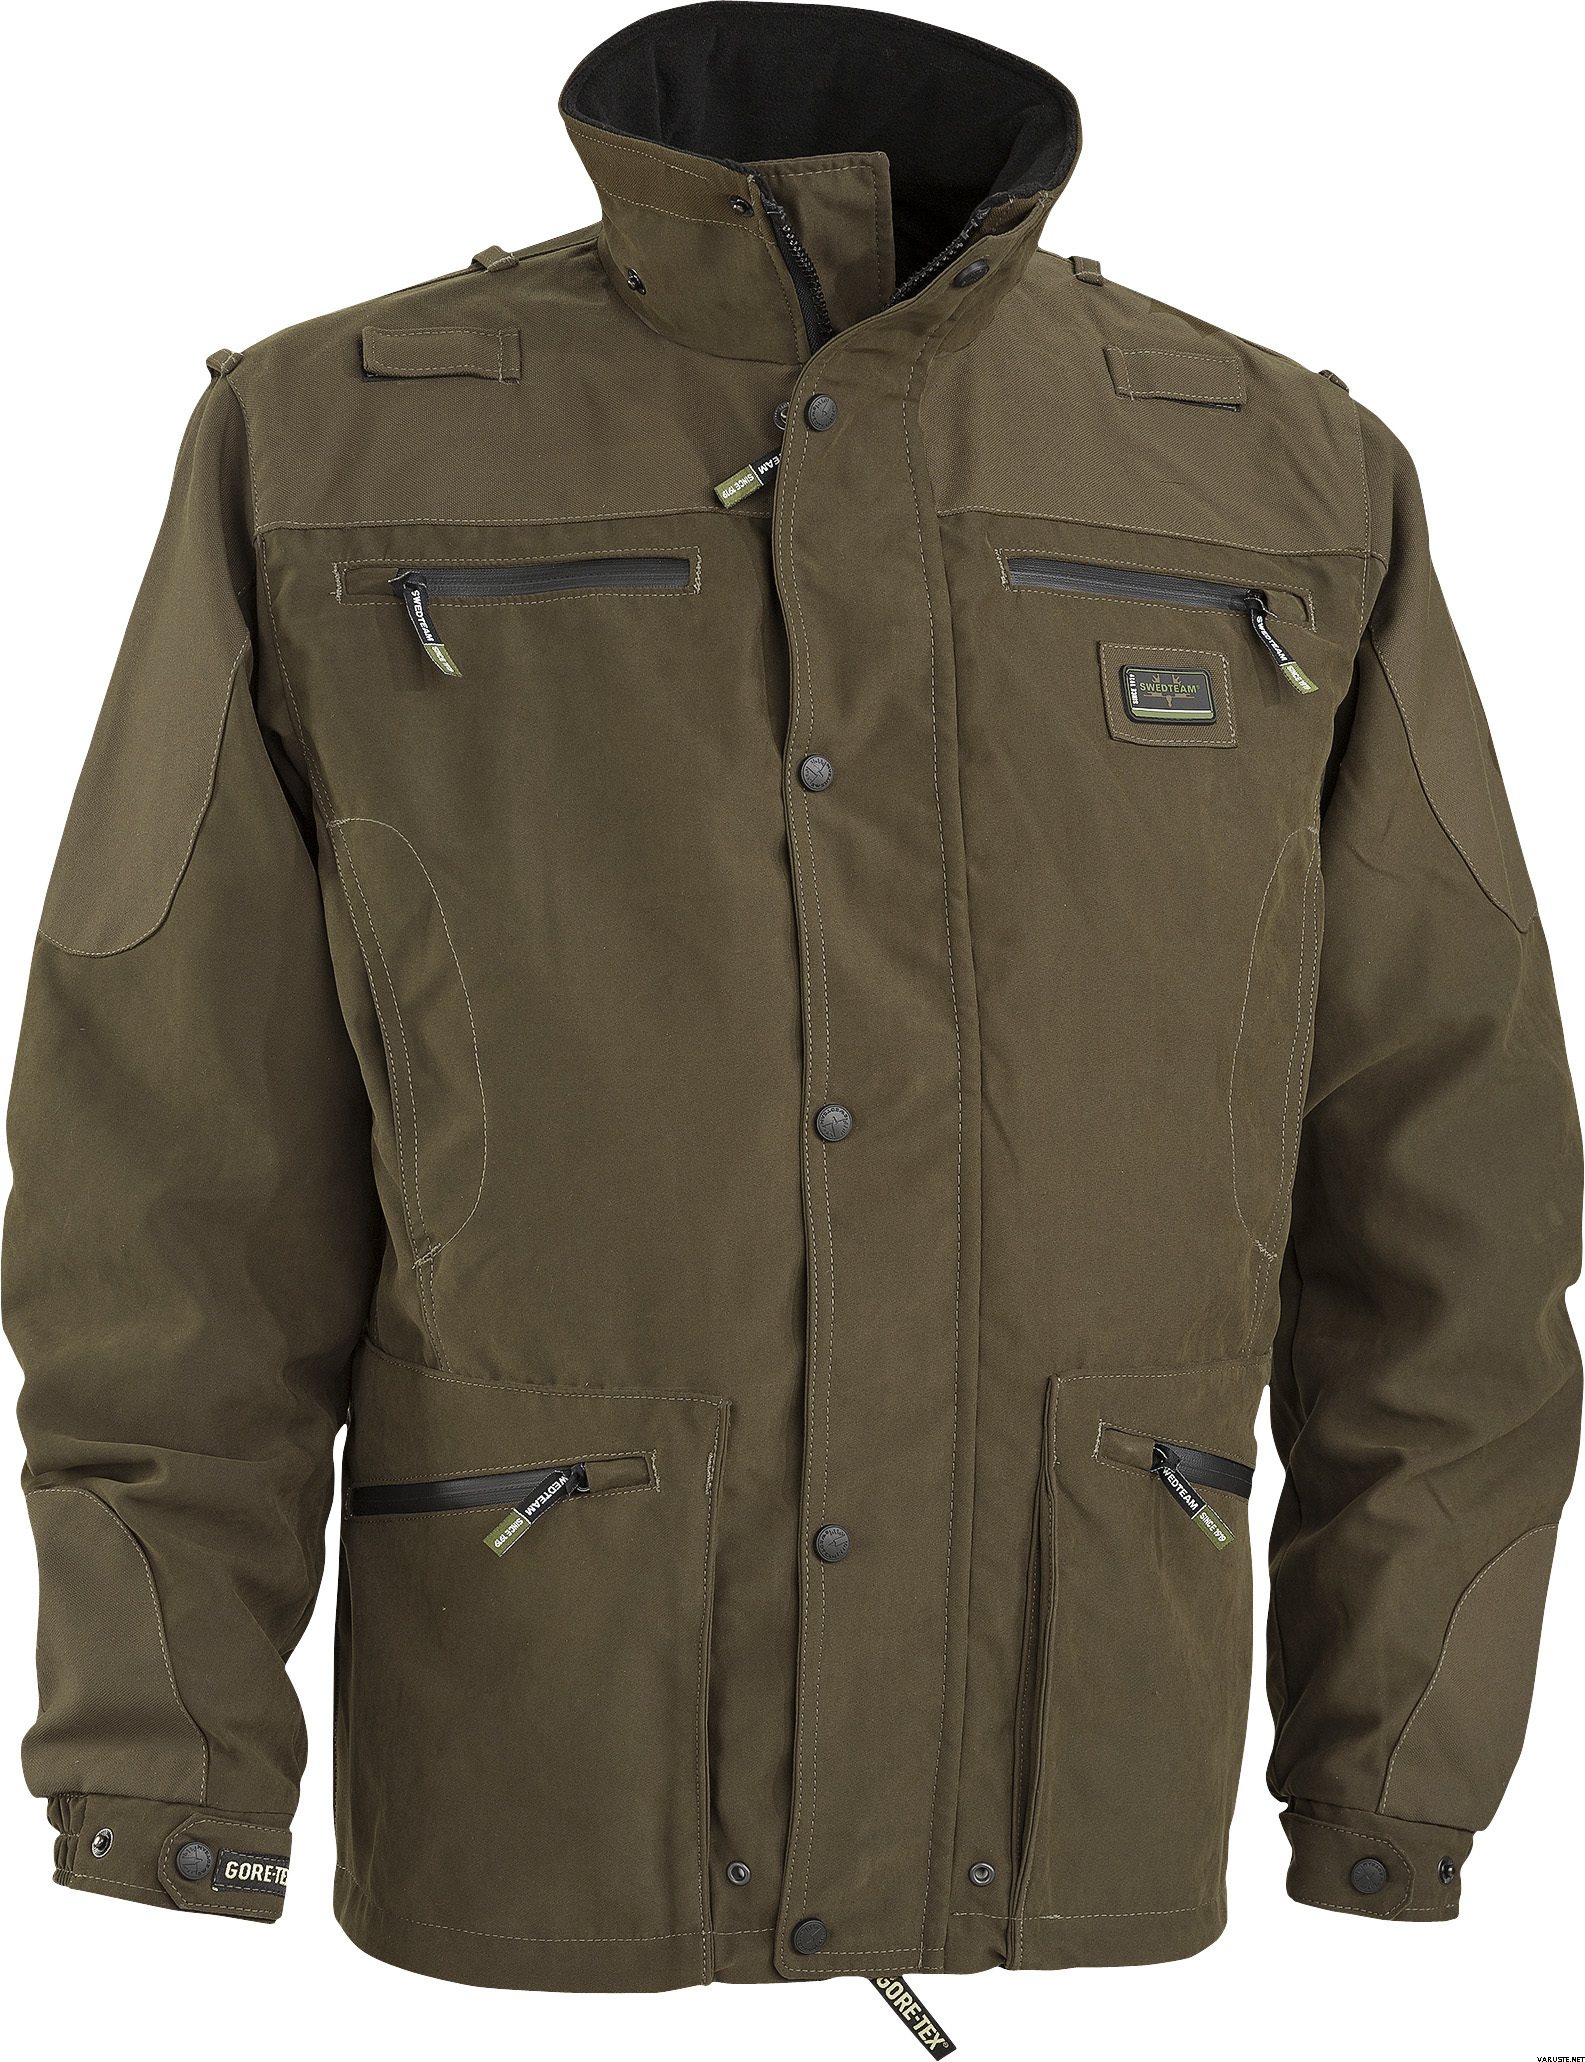 Swedteam Jacket Tampa | Men's Hunting Jackets with Shell | Varuste.net ...